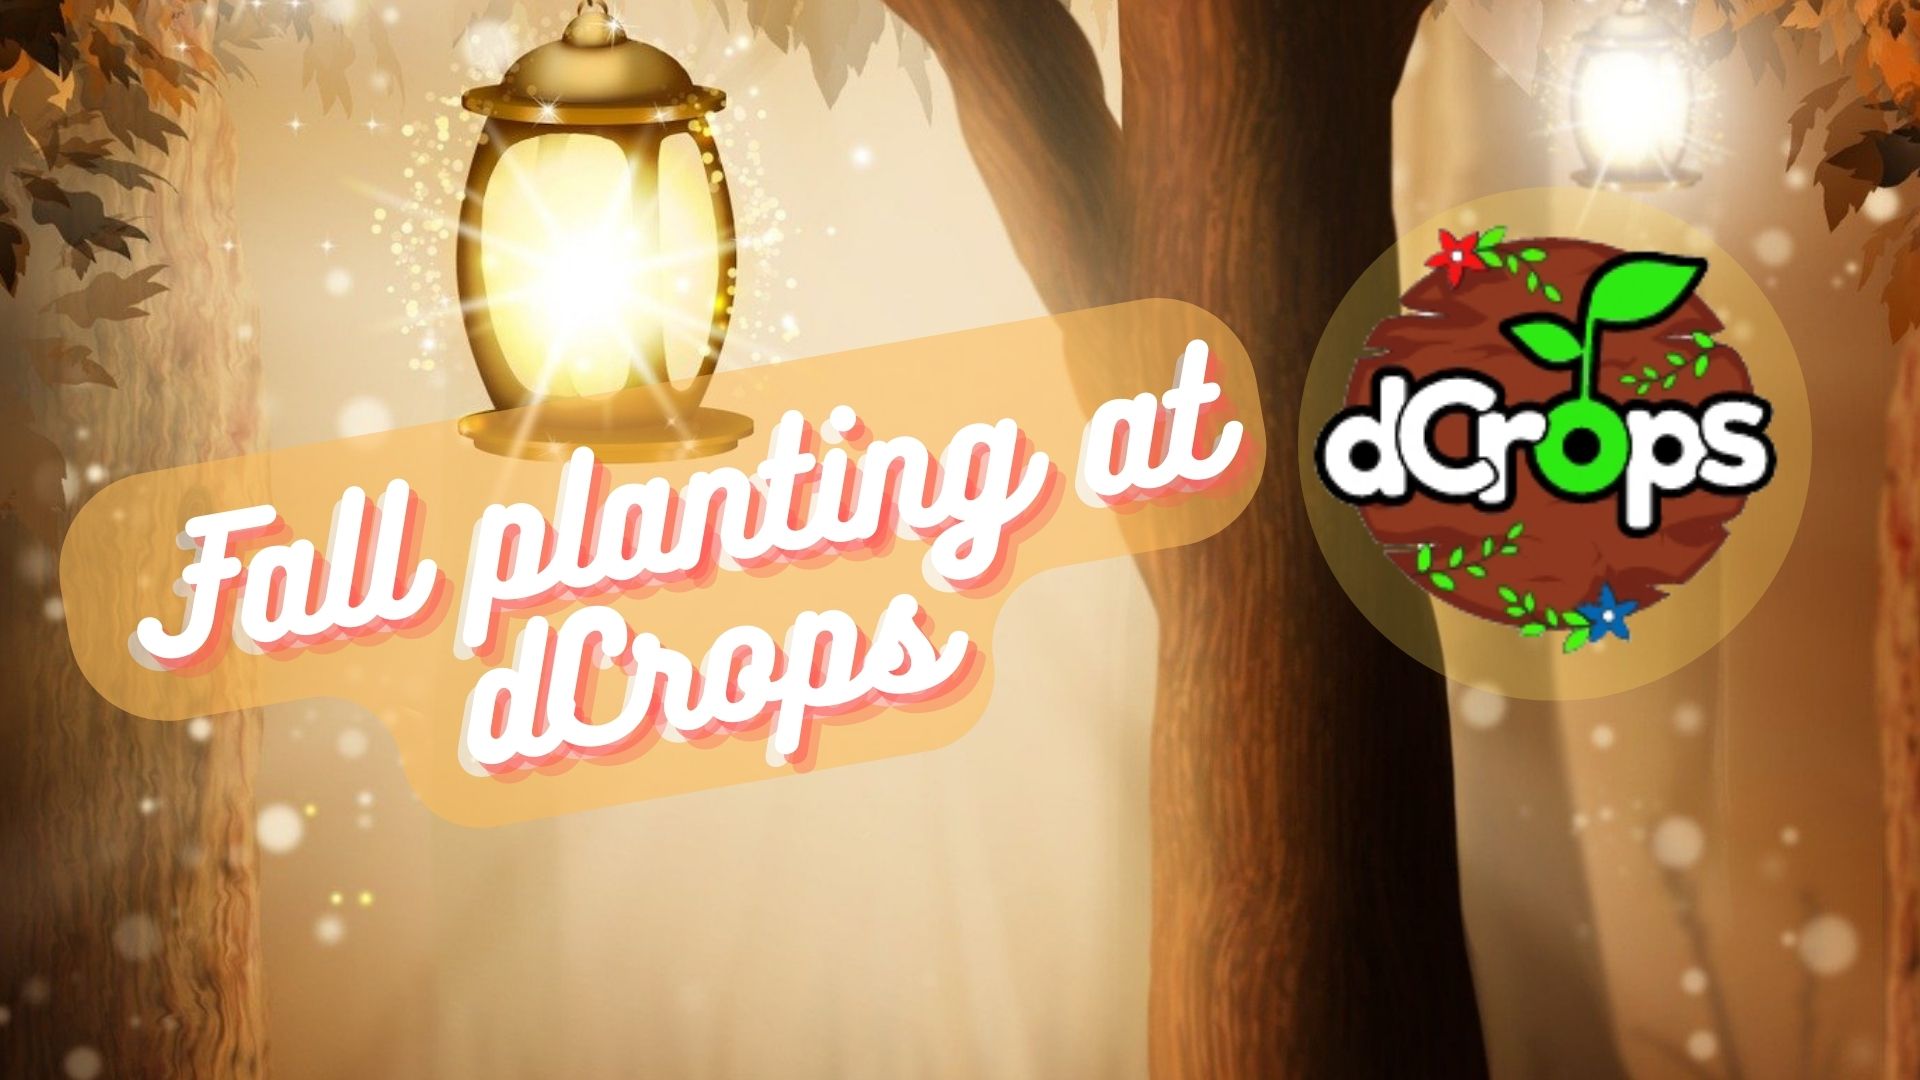 @morenow/fall-planting-at-dcrops-nftgame-in-hive-enes